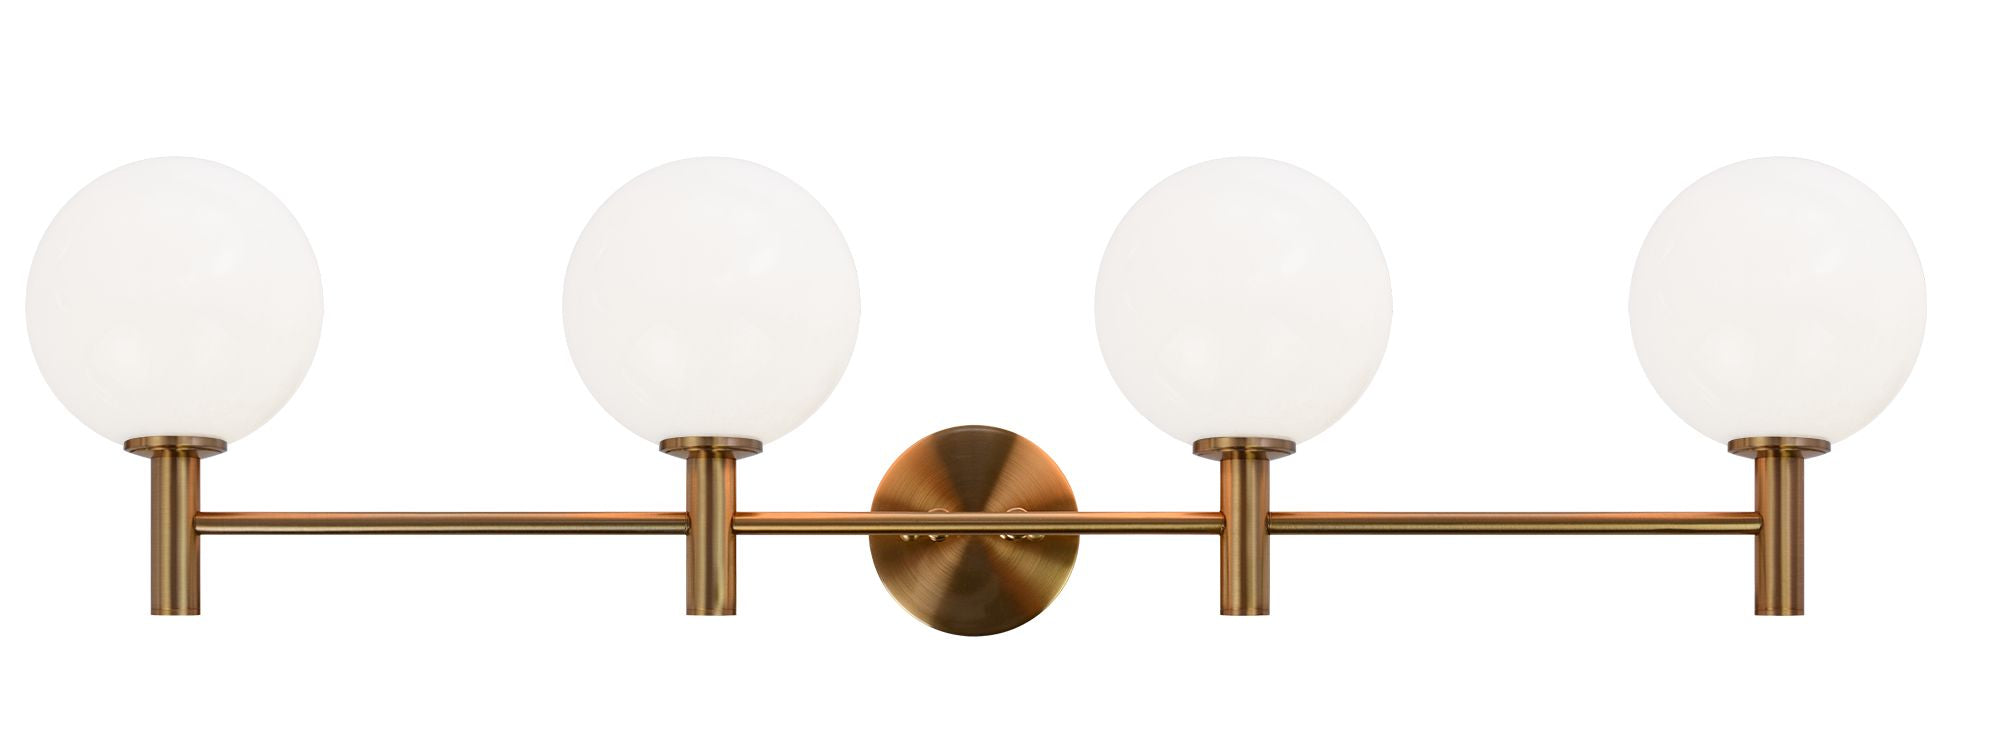 COSMO Wall sconce Gold - S06004AGOP | TEO